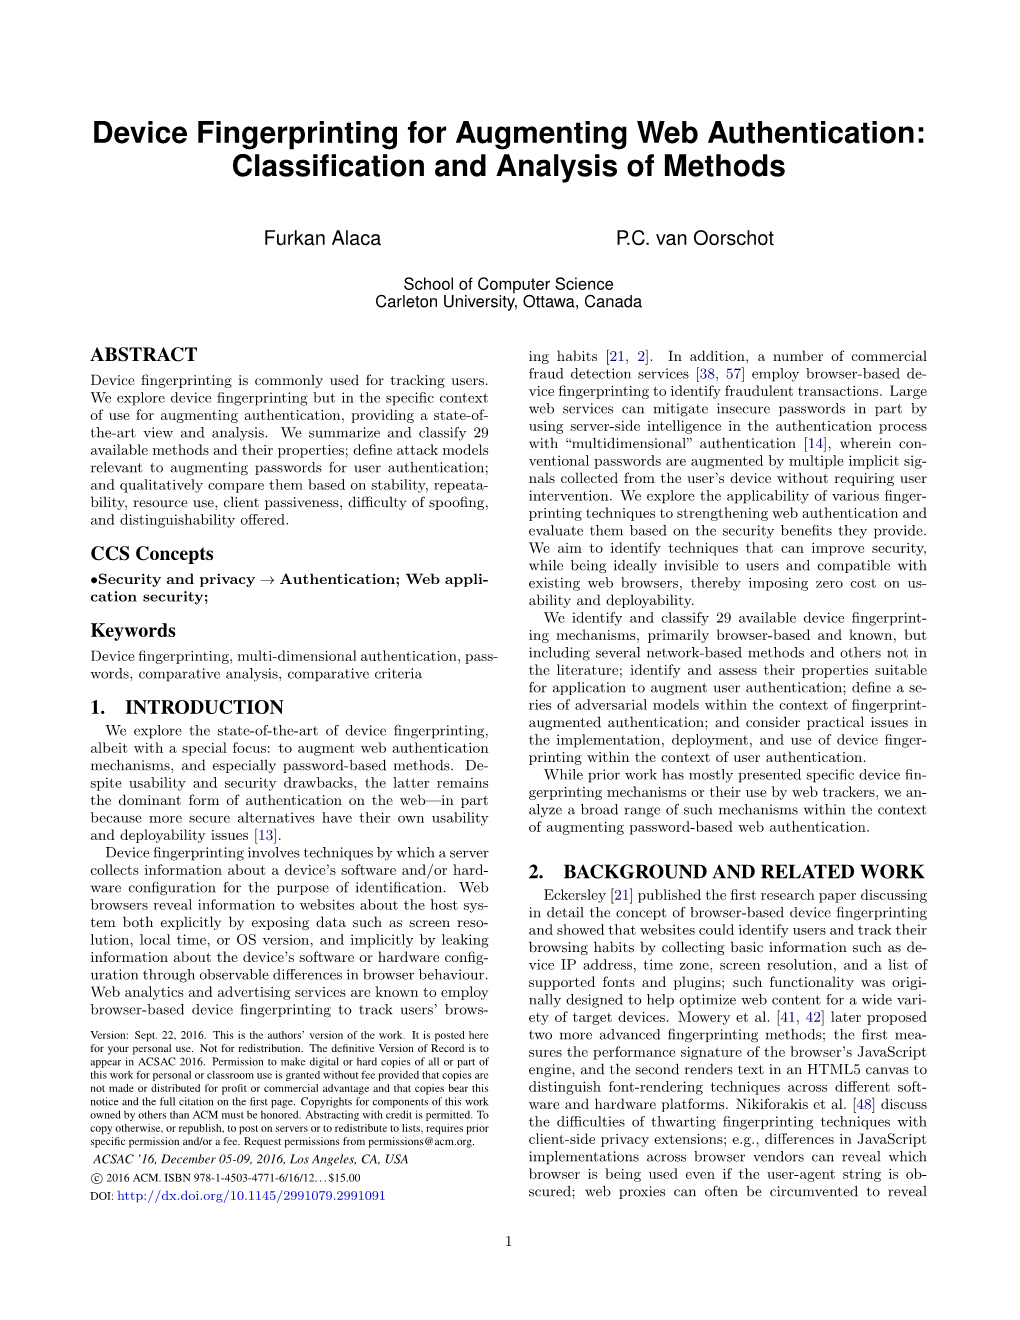 Device Fingerprinting for Augmenting Web Authentication: Classiﬁcation and Analysis of Methods